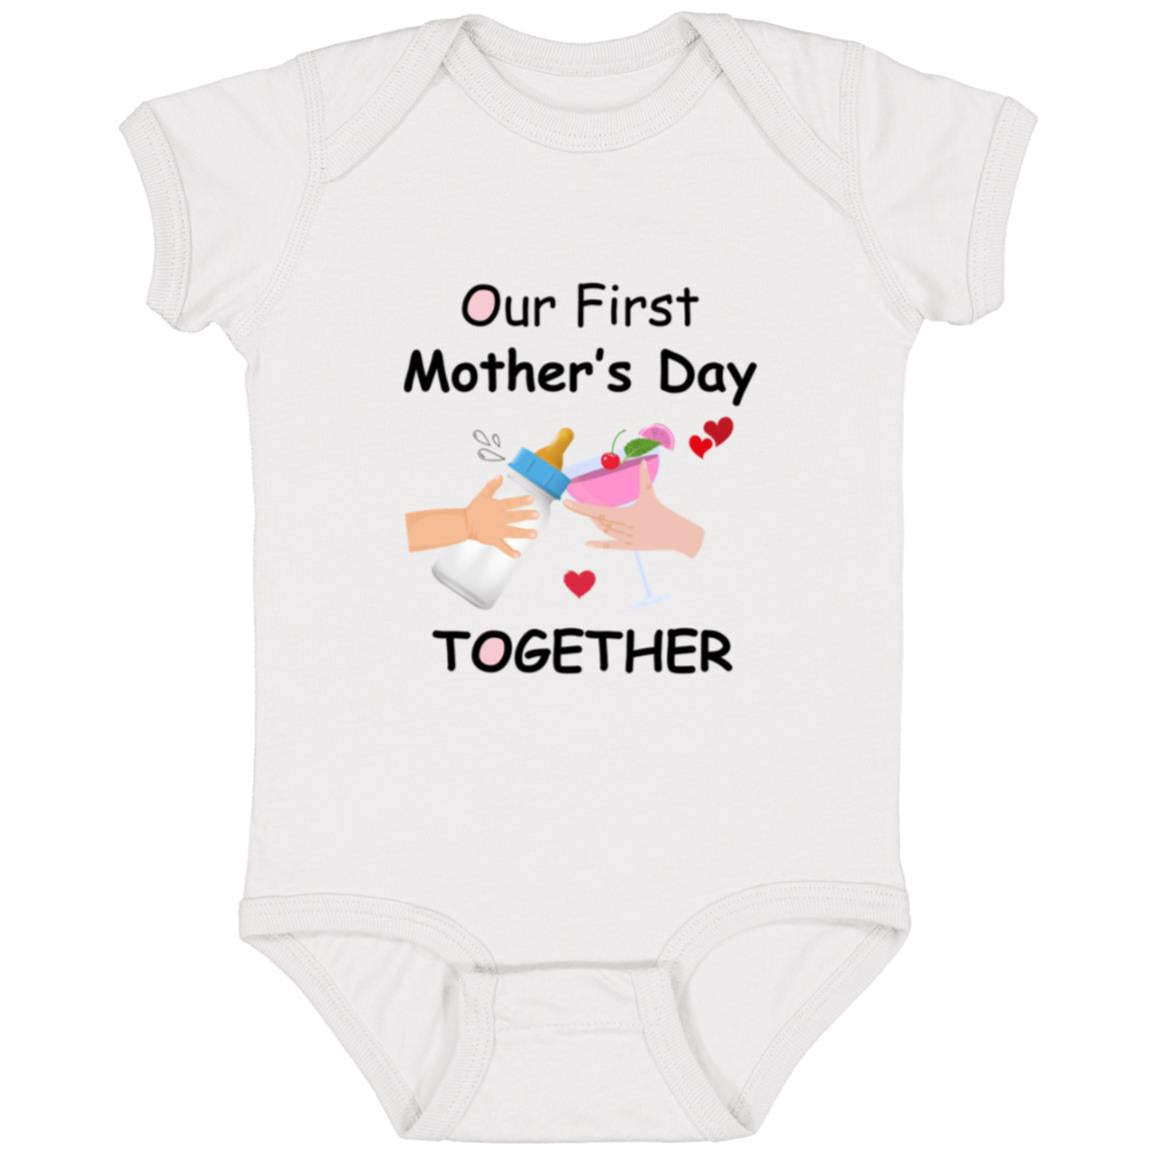 Our First Mother's Day Together | Infant Bodysuit